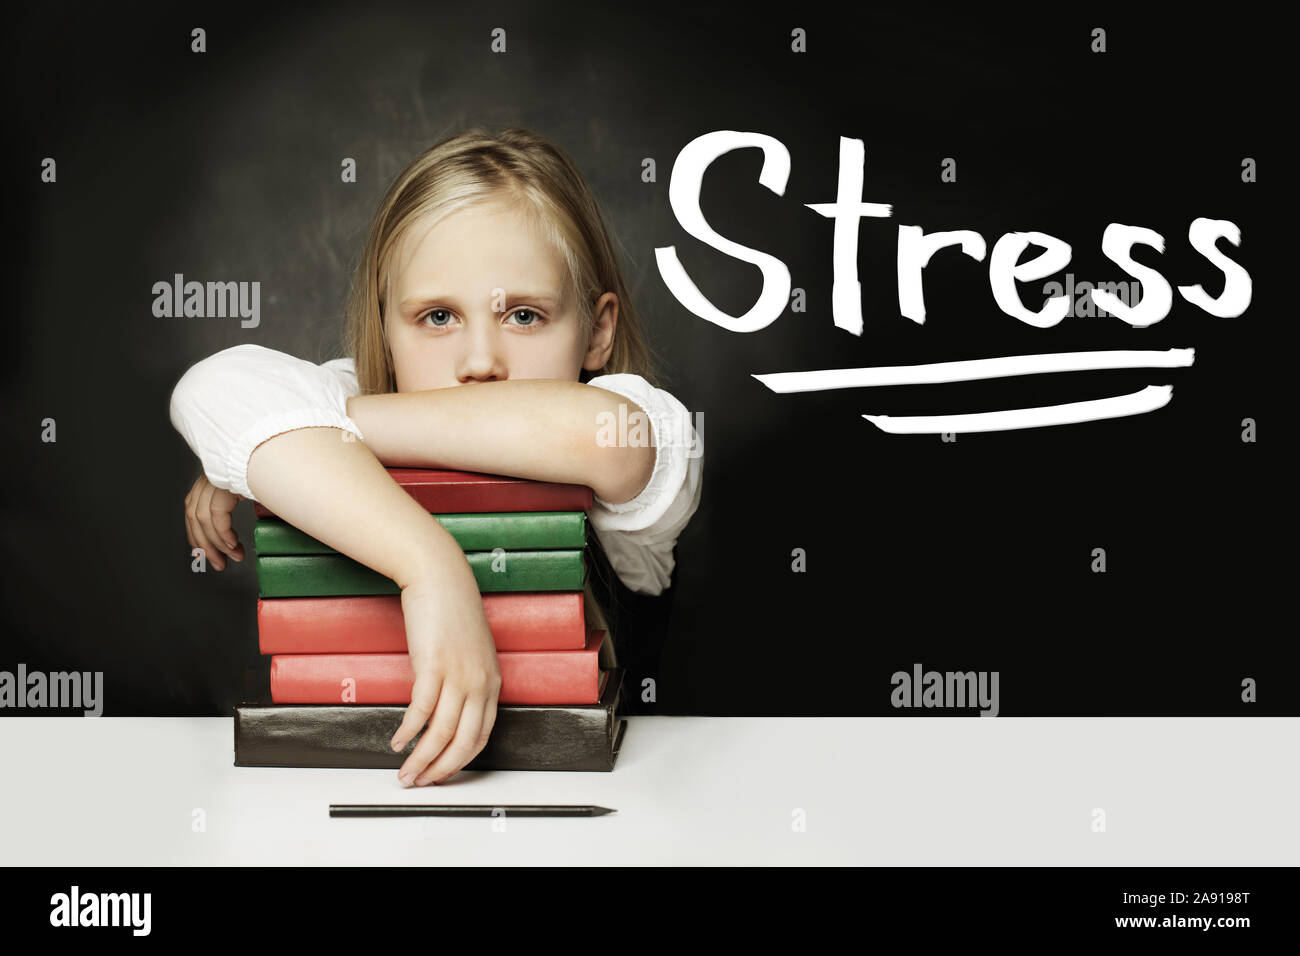 Sad Tired child with books. Stress concept Stock Photo